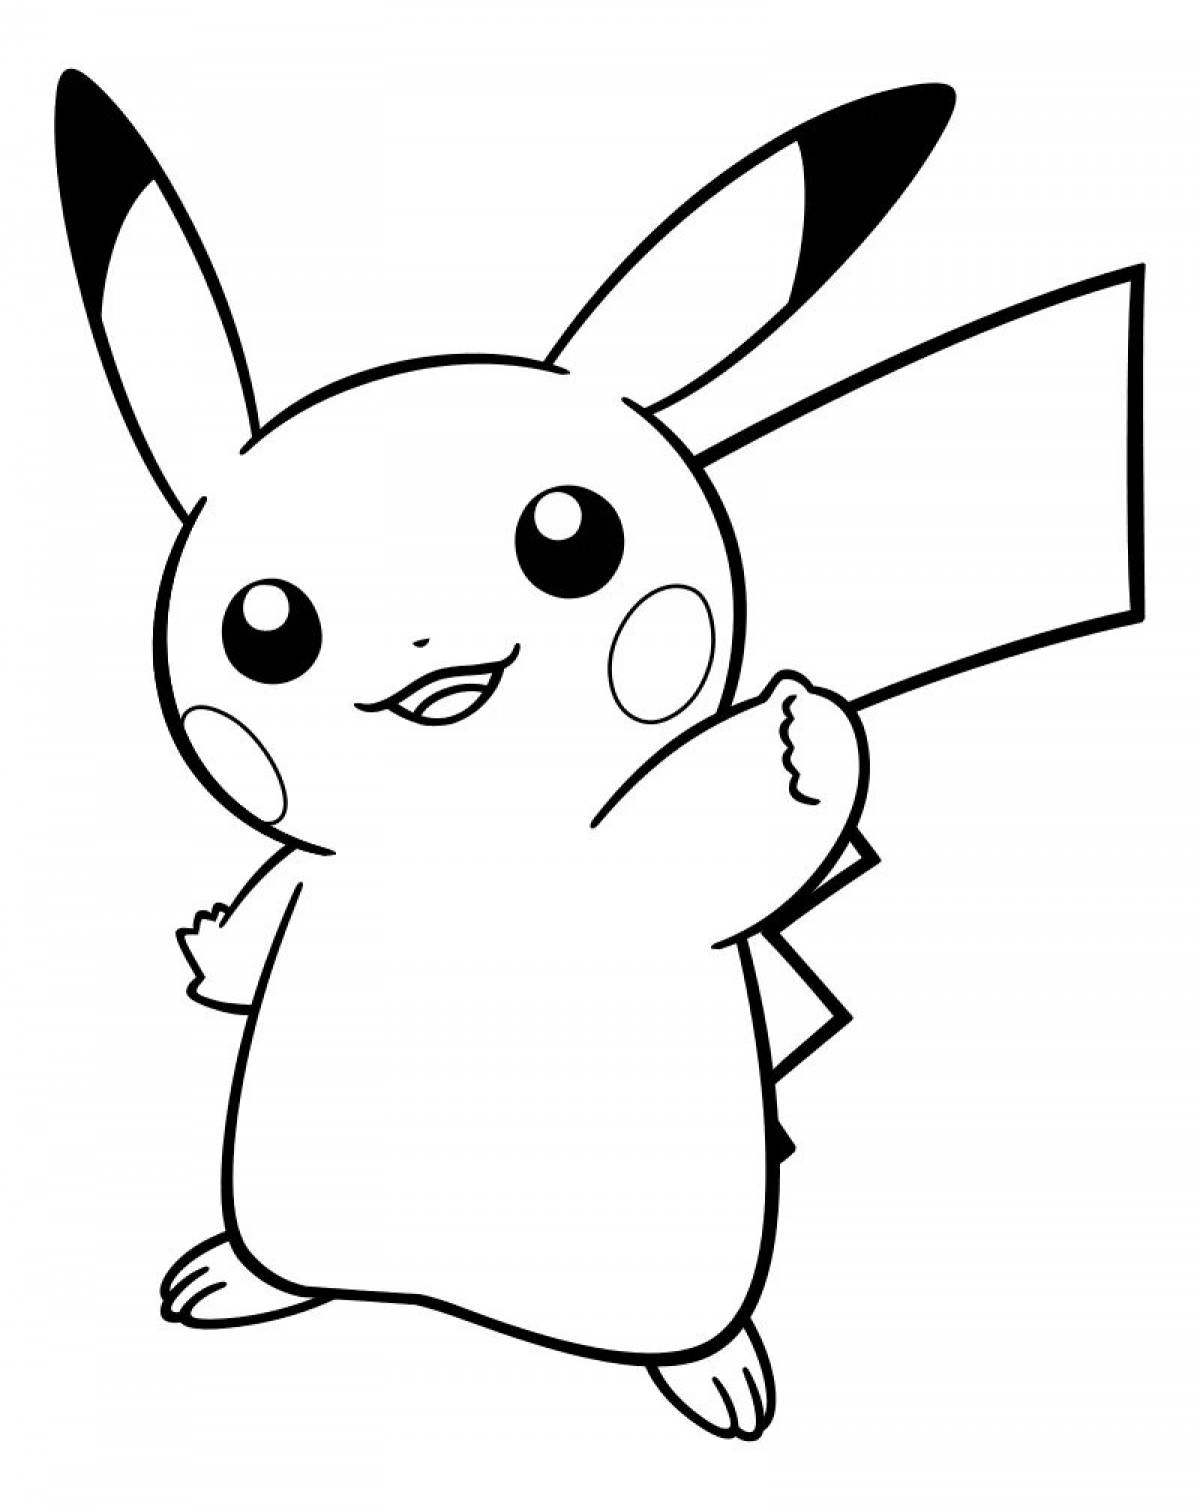 Great pikachu seal coloring page